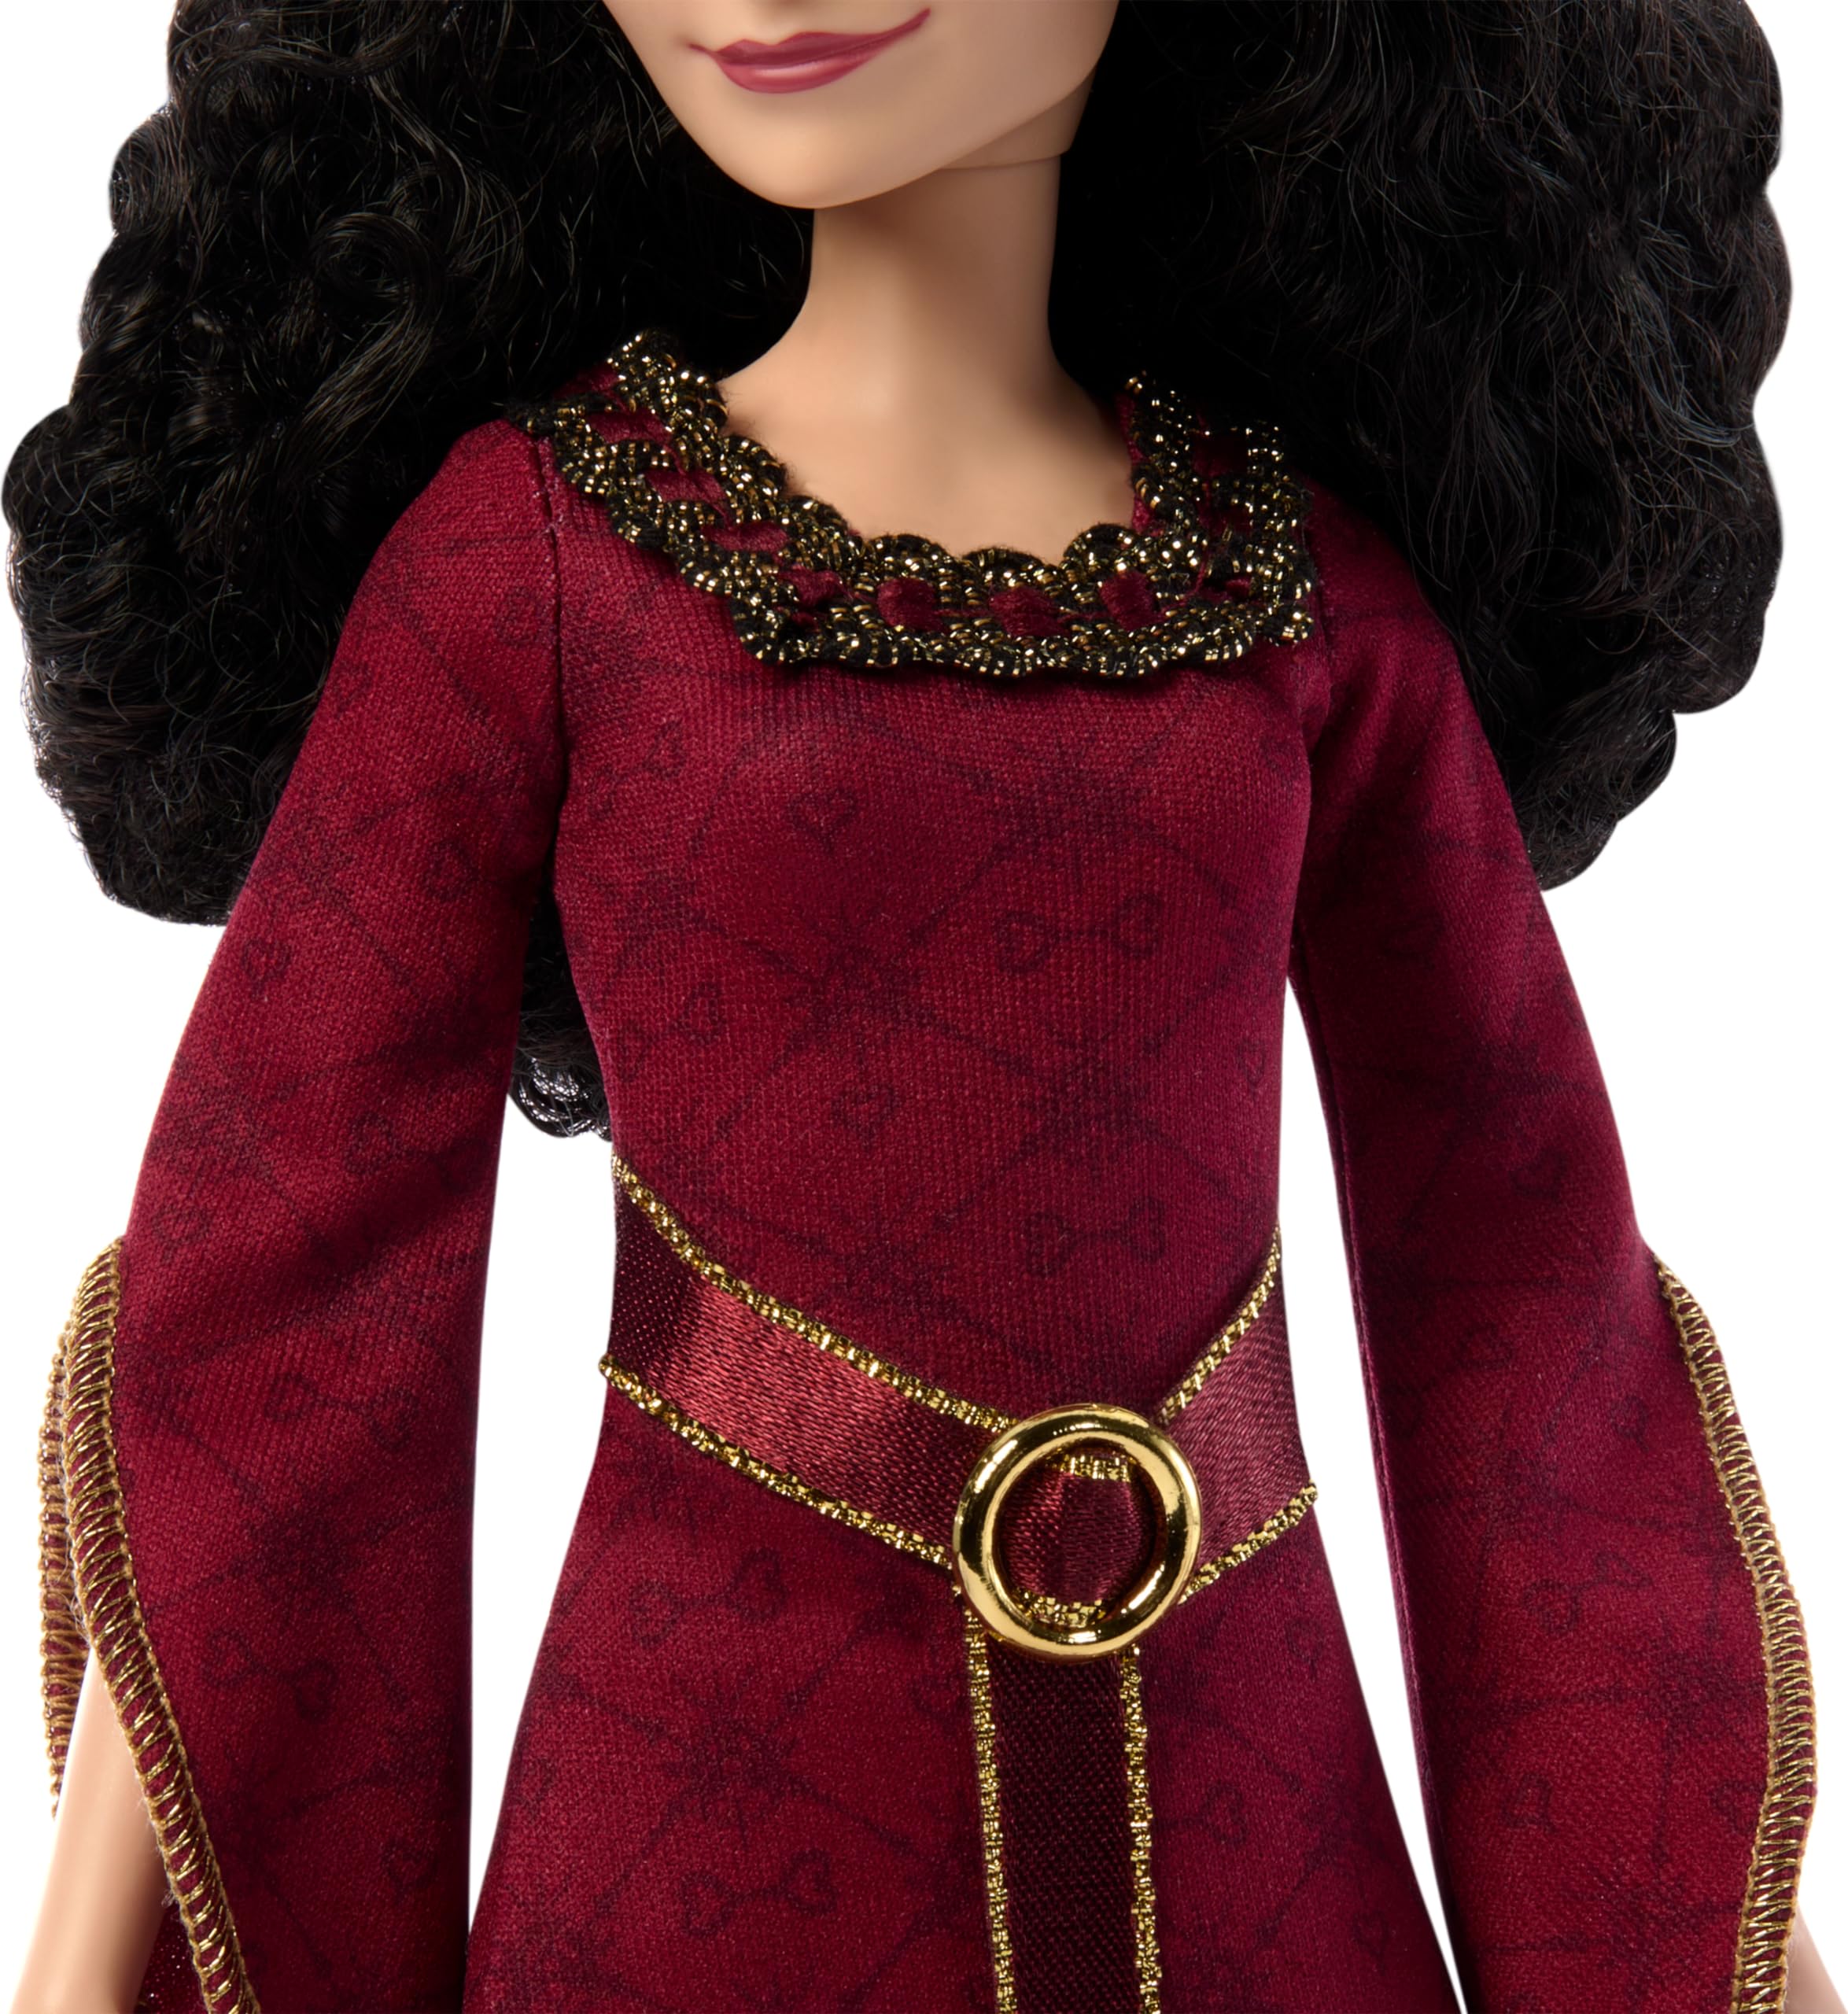 Mattel Disney Villains Mother Gothel Fashion Doll with Removable Outfit and Basket & Flower Accessories, Inspired by Mattel Disney Movie Tangled, Posable (Amazon Exclusive)